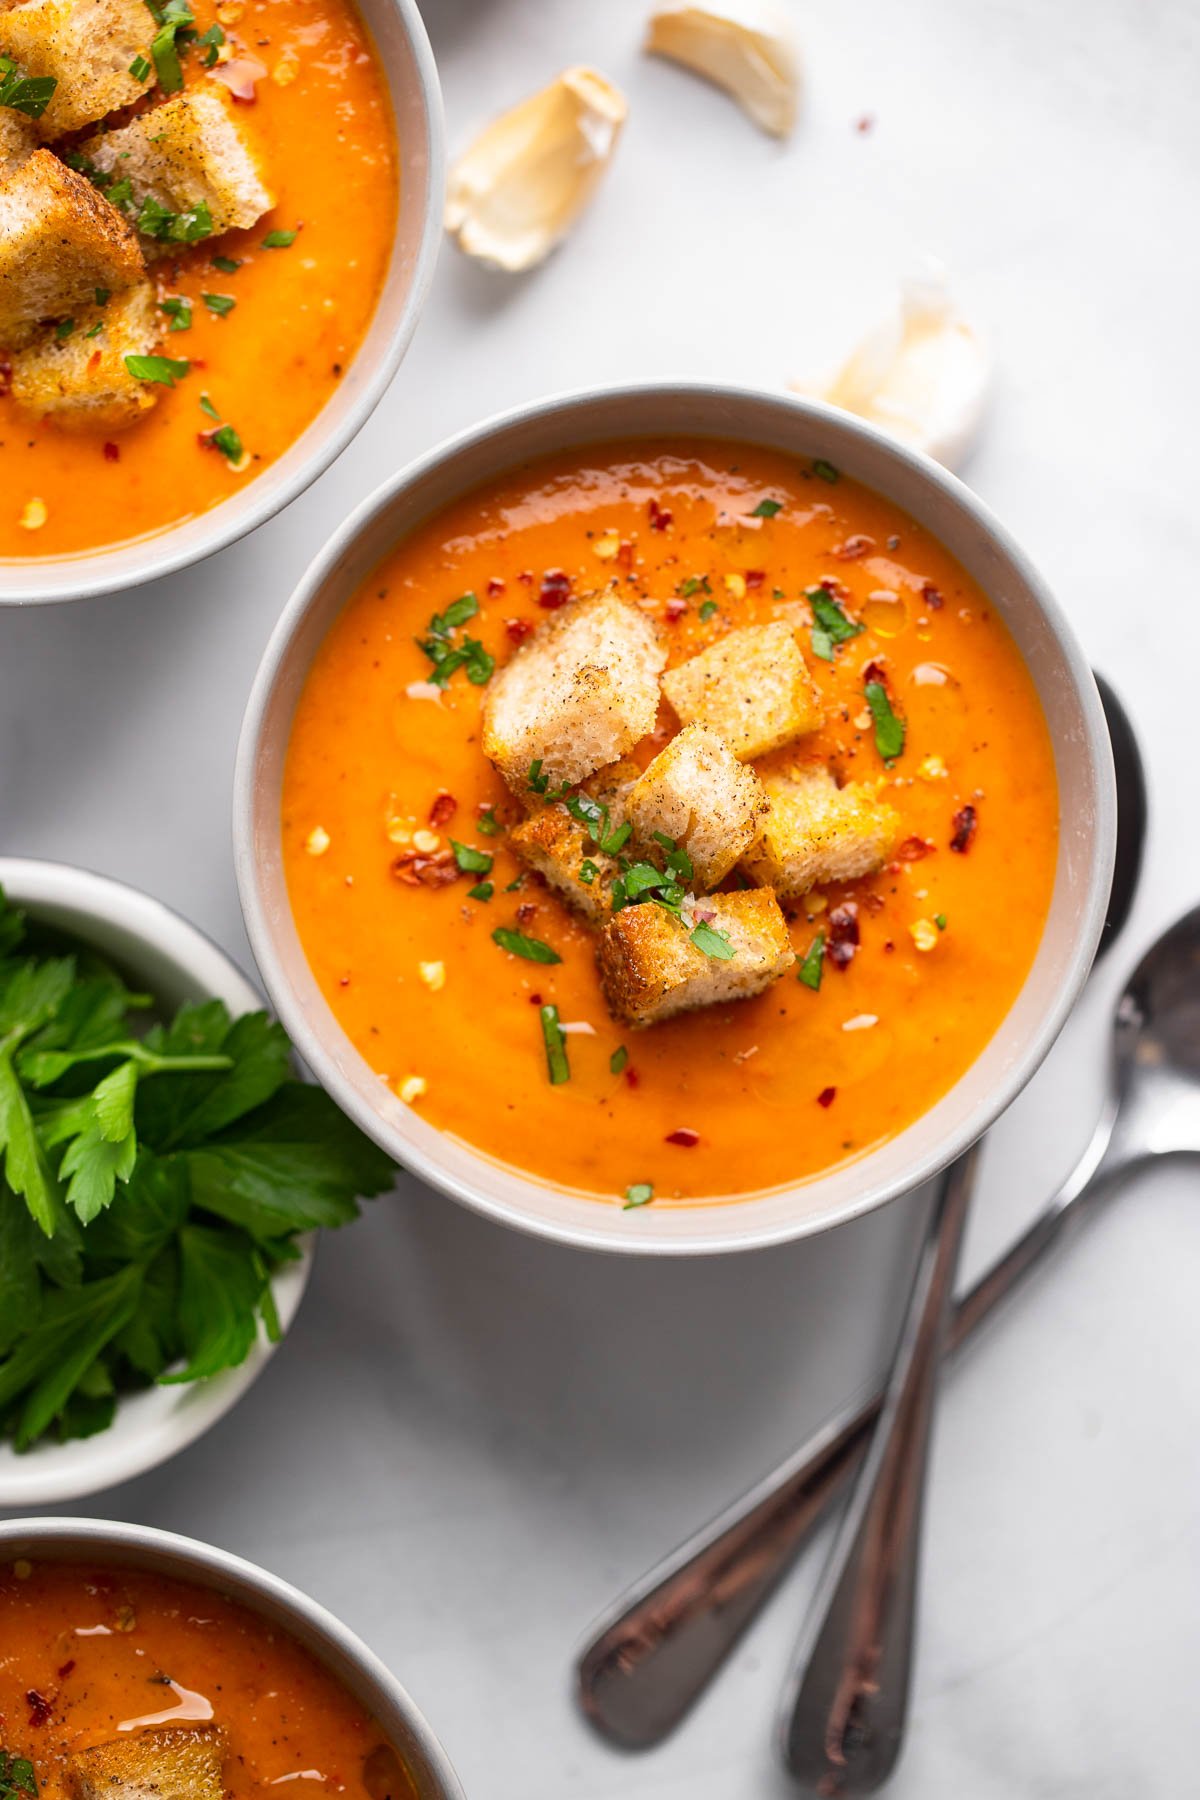 butternut squash and red pepper soup in bowl garnished with croutons and parsley.